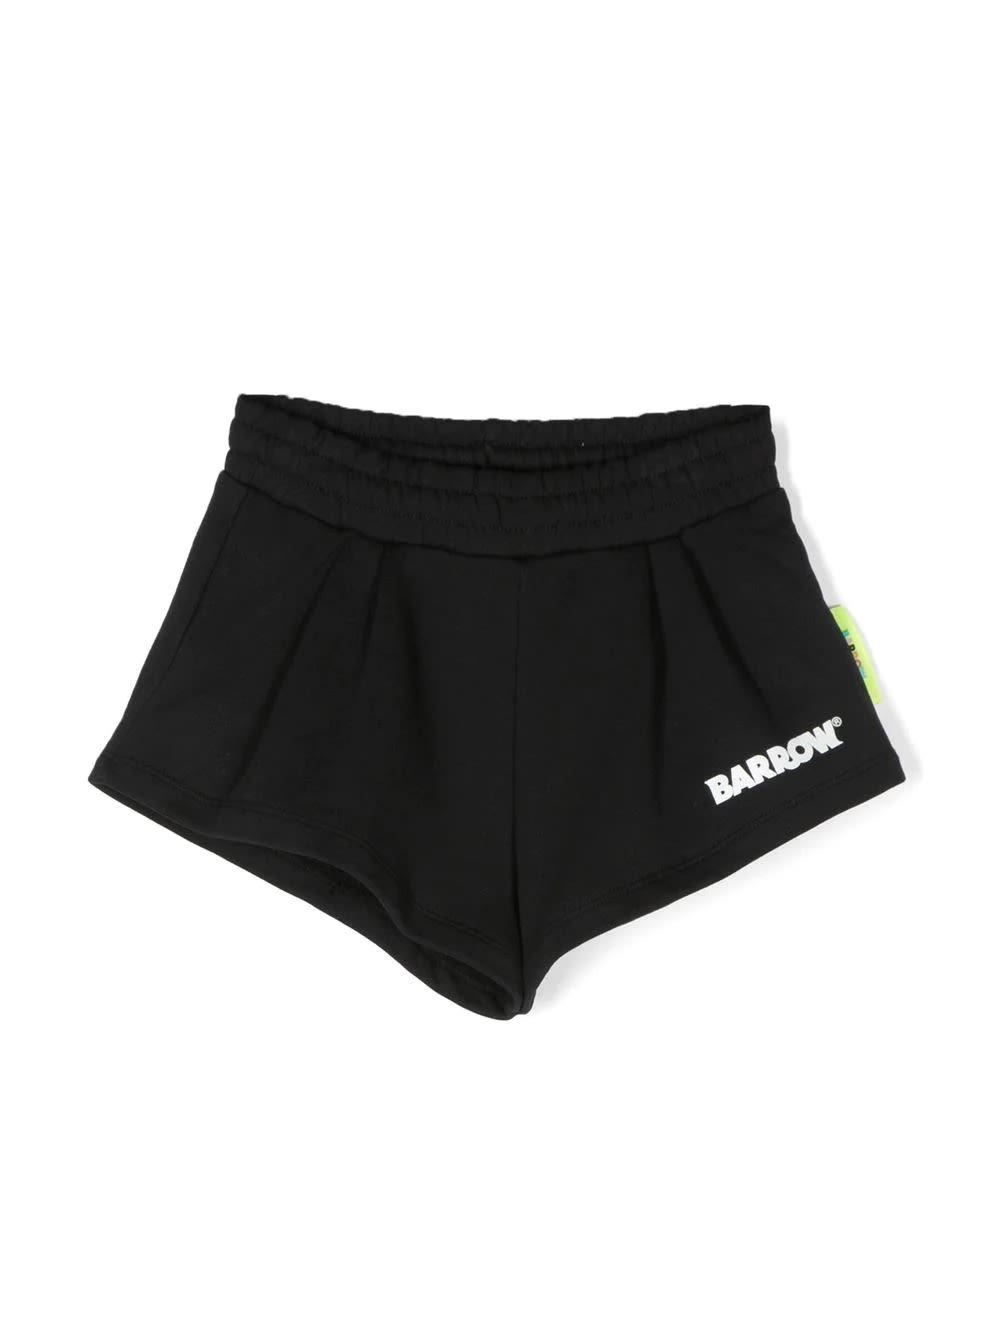 BARROW BLACK SHORTS WITH FRONT AND BACK LOGO